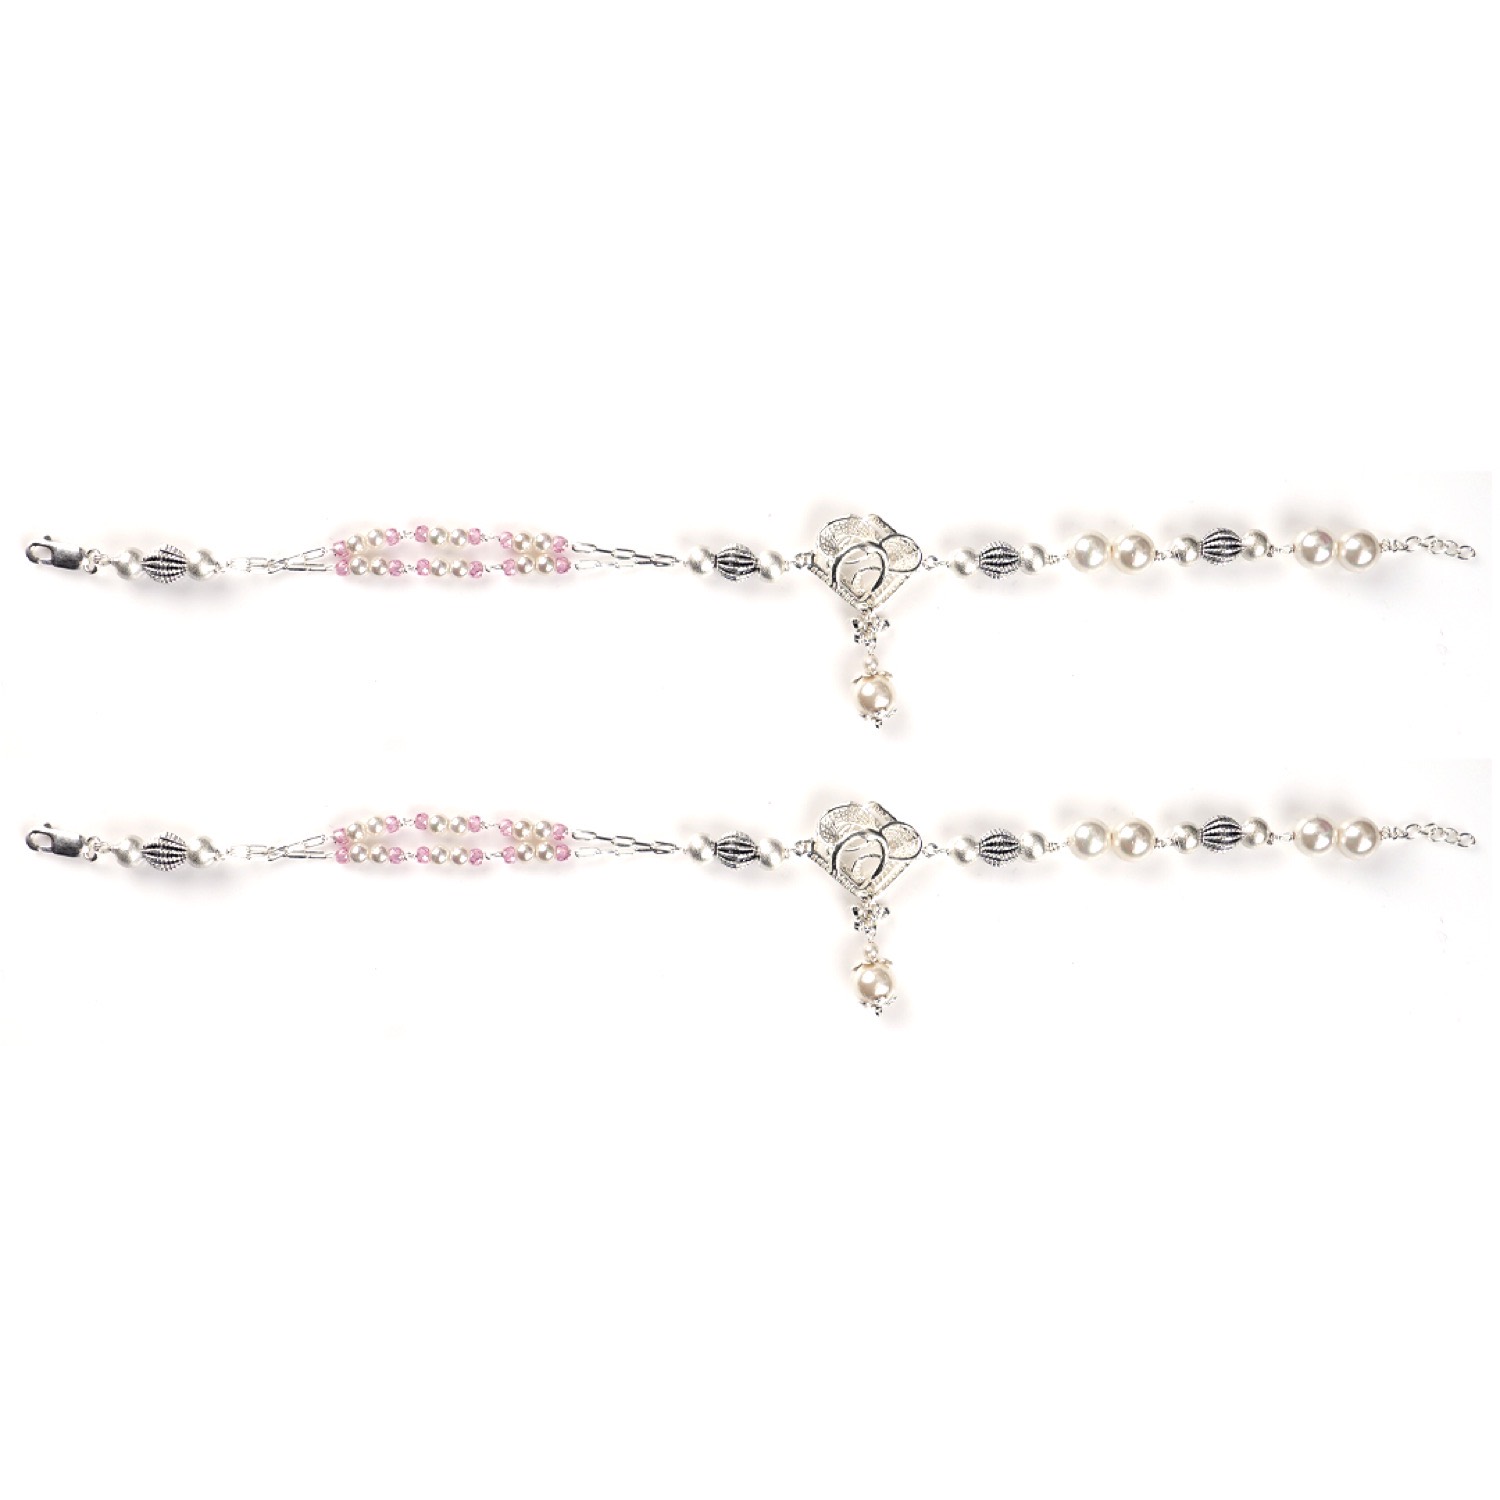 varam_anklets_072022_white_and_baby_pink_stone_silver_anklets_099-1